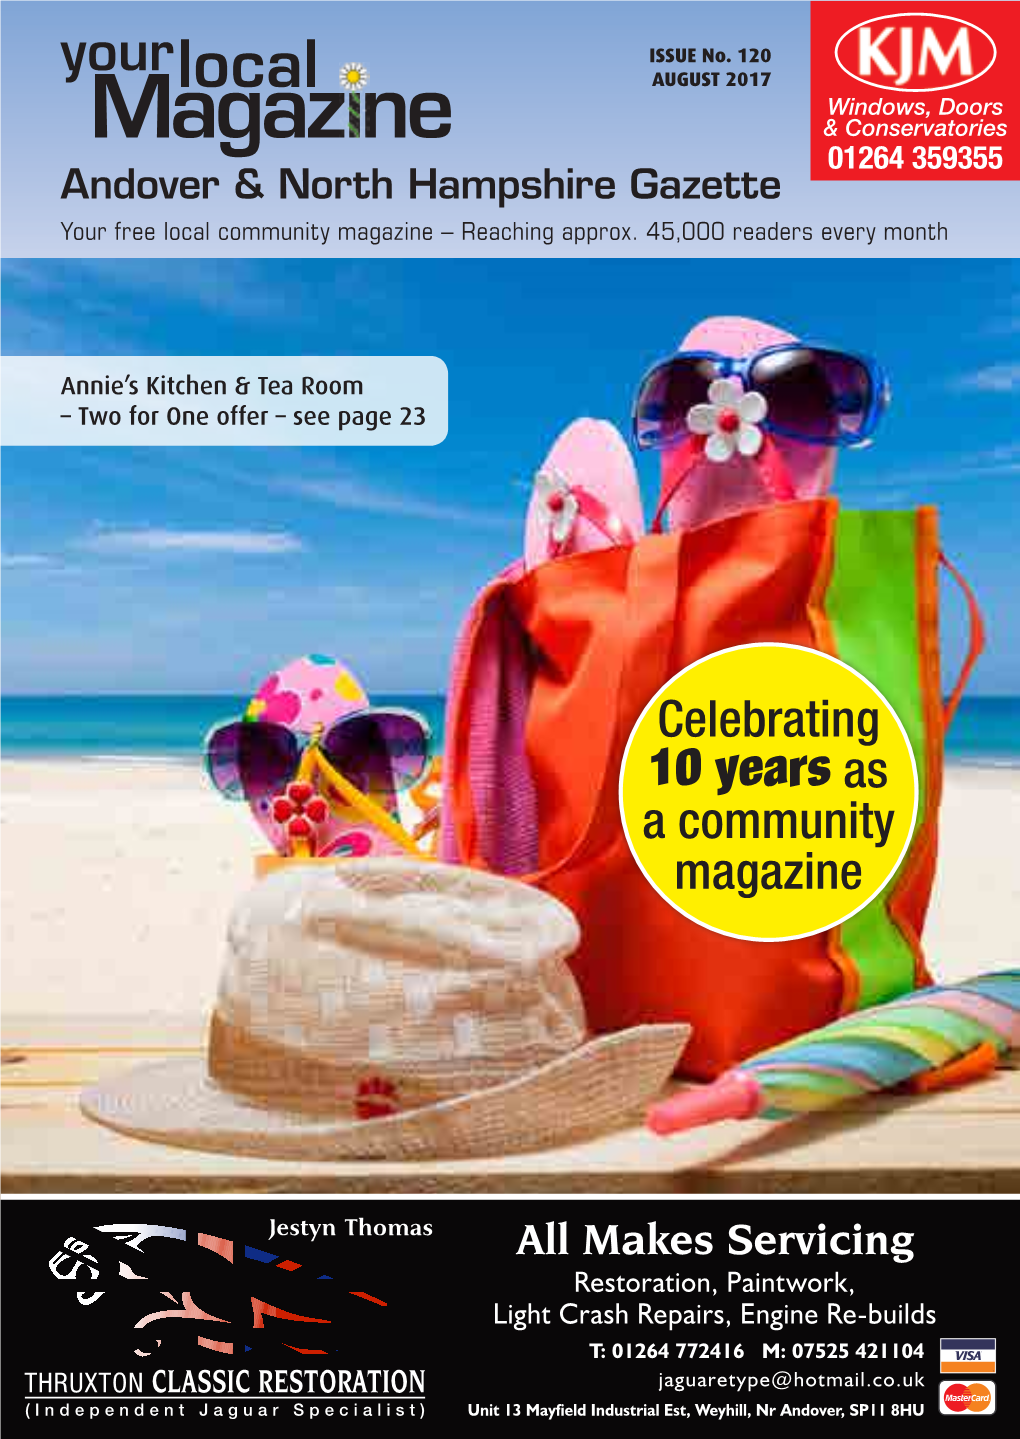 Magazine & Conservatories 01264 359355 Andover & North Hampshire Gazette Your Free Local Community Magazine – Reaching Approx